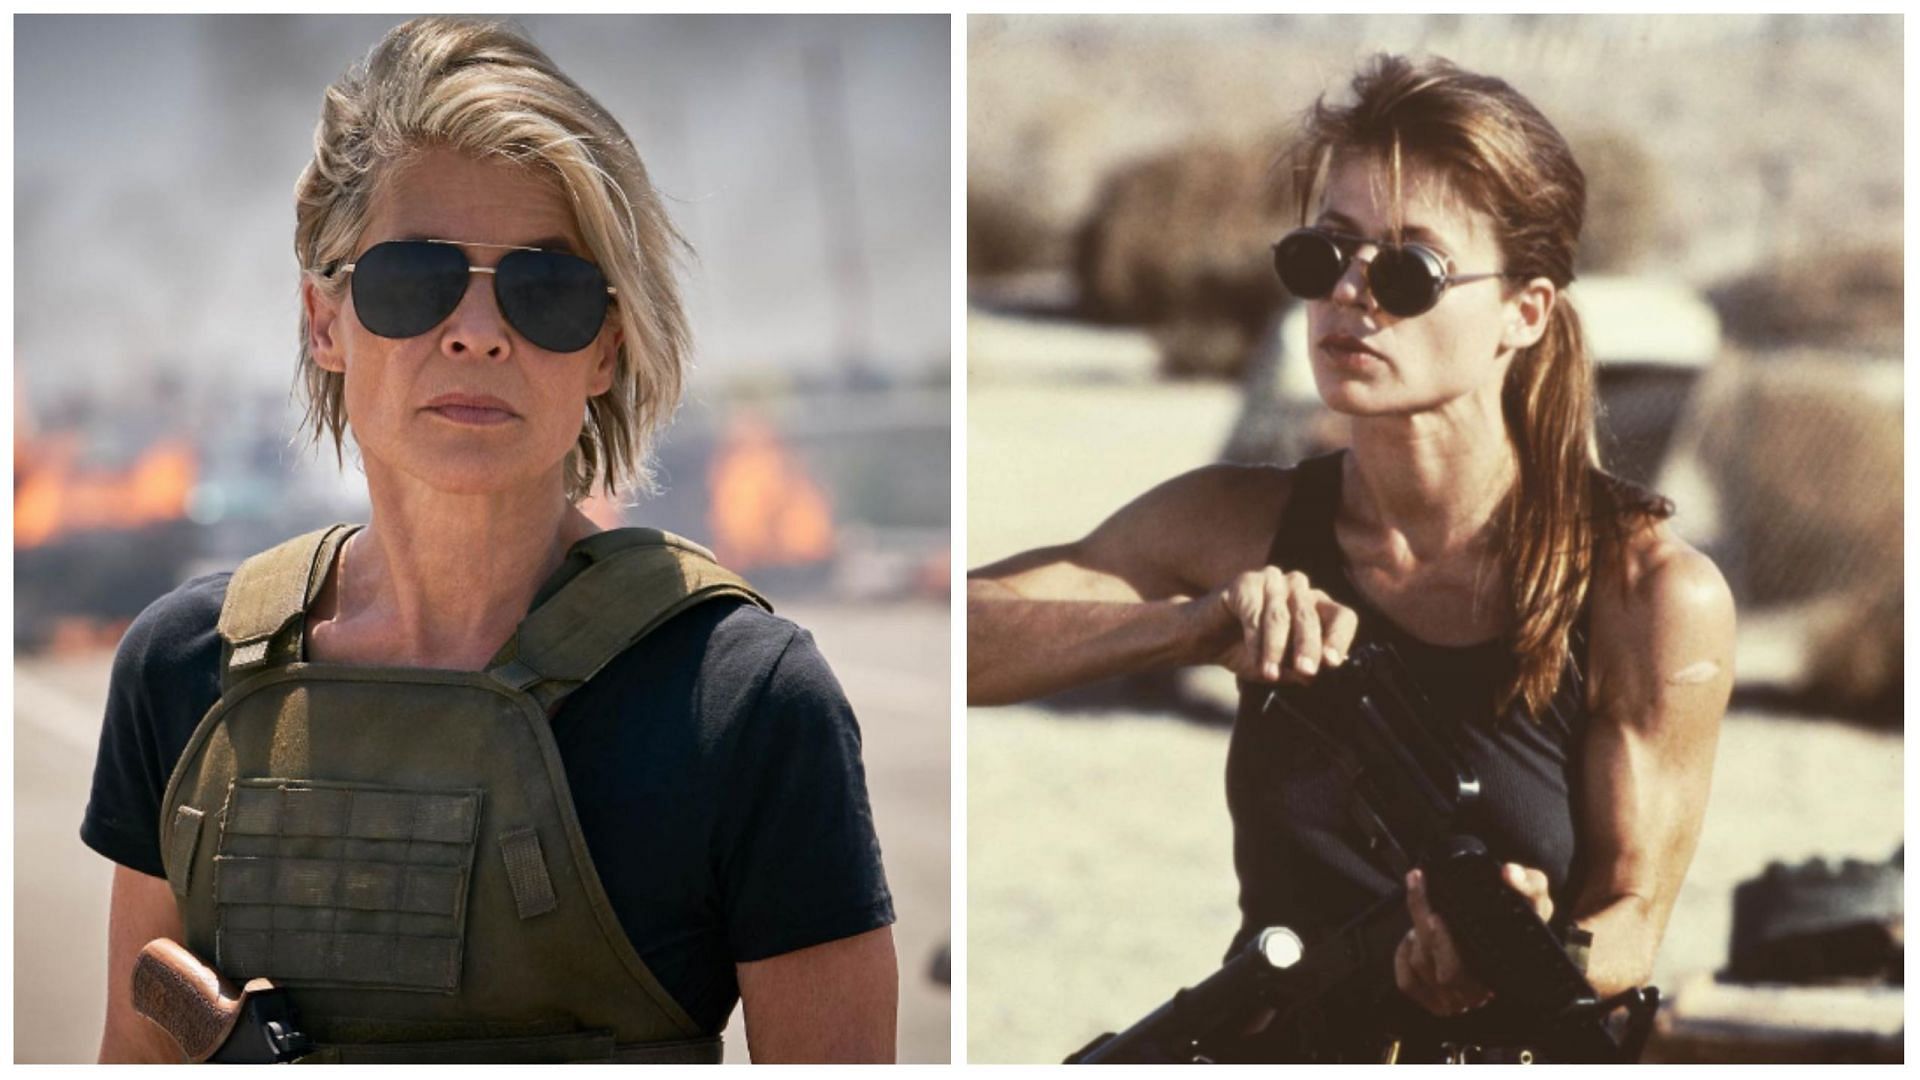 Linda Hamilton trained hard and ate no carbs for a year to prepare for her role. (Image via Instagram @terminator / @carmenzbrown )